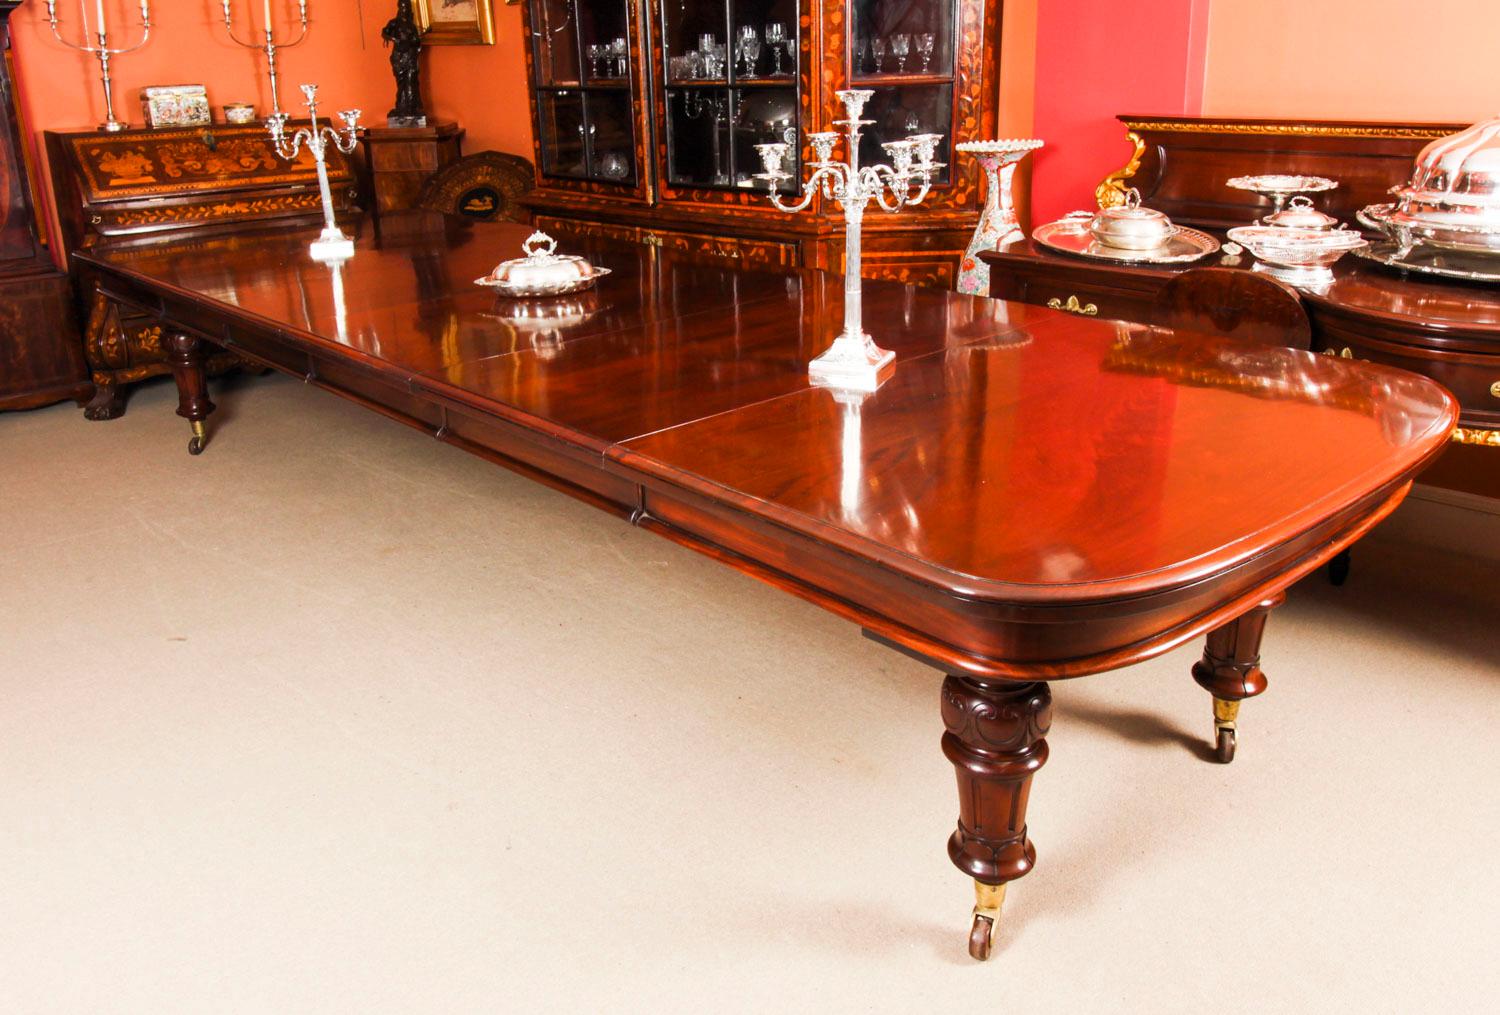 This is a beautiful antique William IV flame mahogany extending dining table, circa 1835 in date.

This amazing table can seat fourteen people in comfort and has been hand-crafted from beautiful solid flame mahogany.

The beautifully figured flame